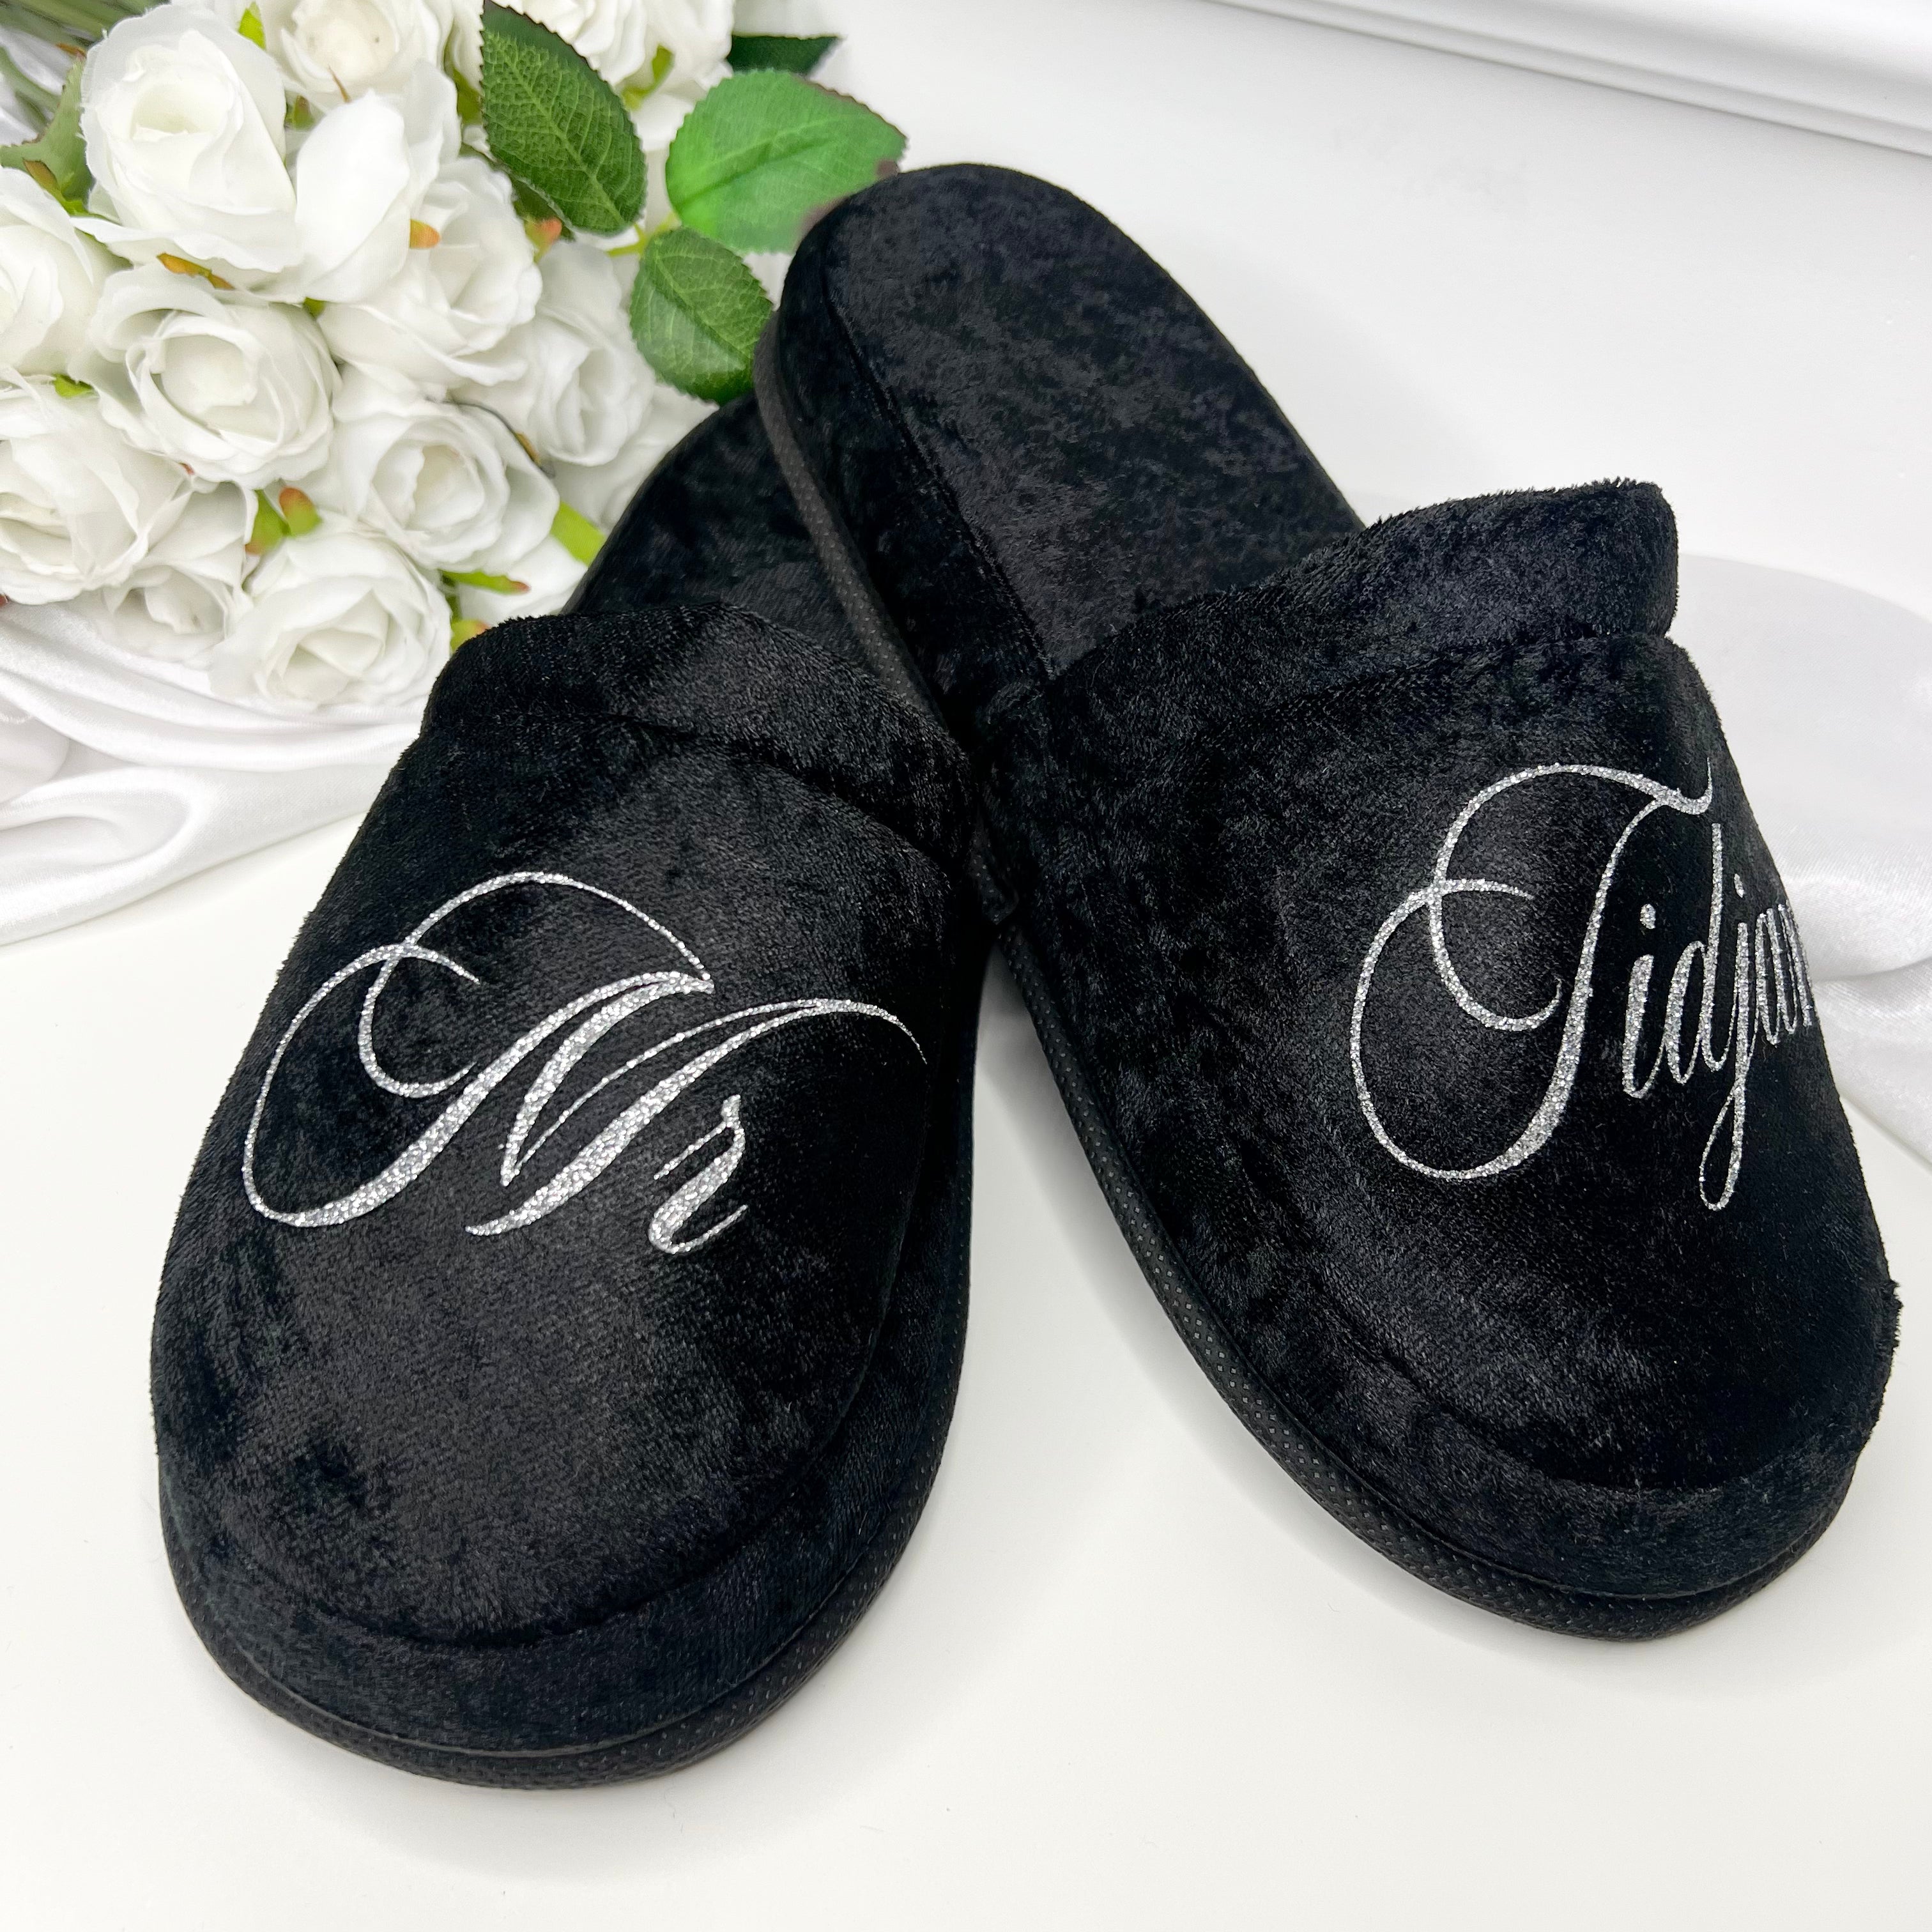 Personalized slippers